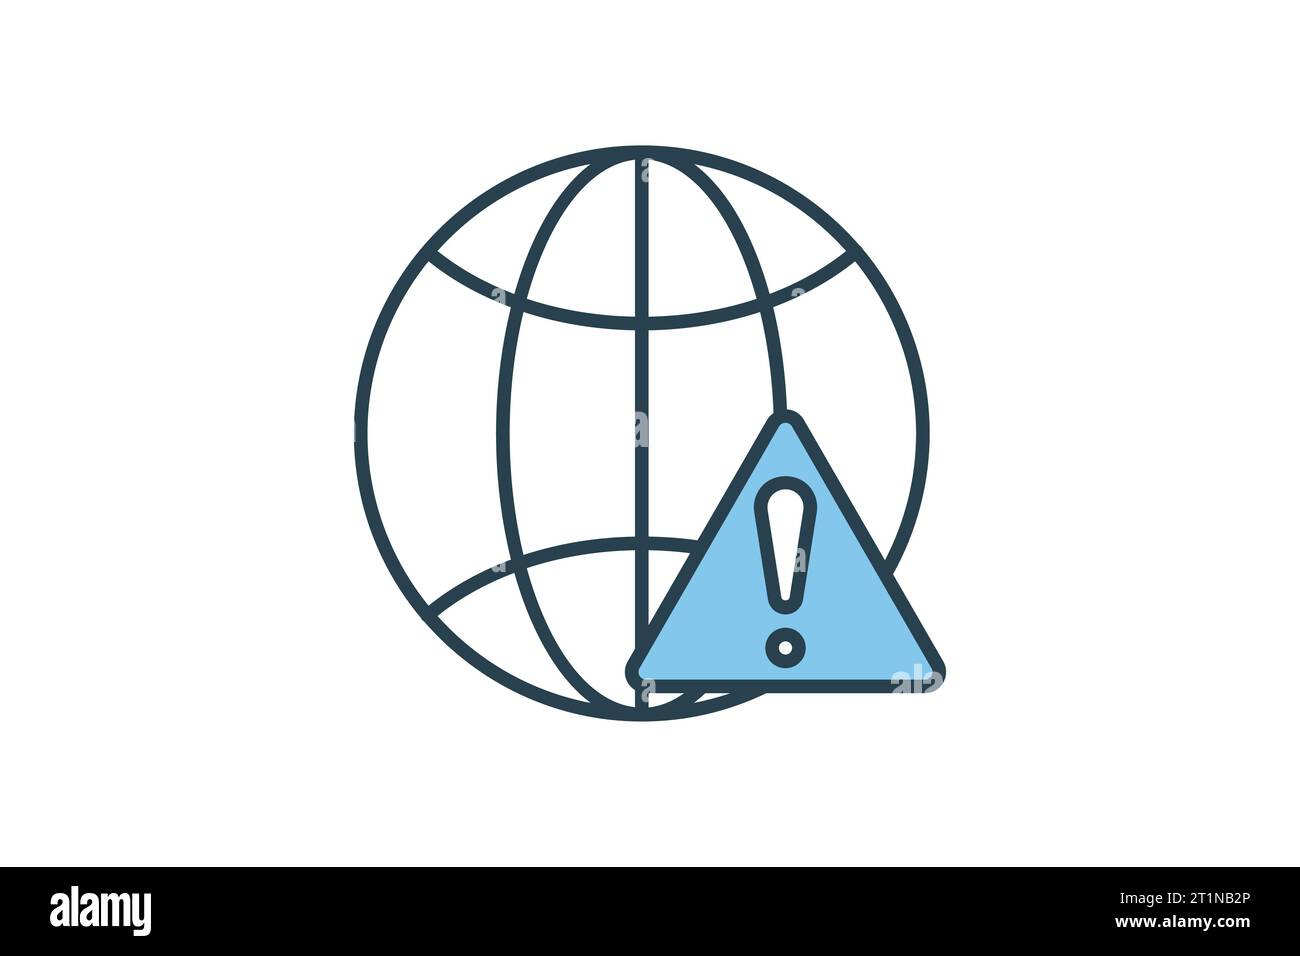 Network error icon. earth with exclamation mark. icon related to warning, notification. suitable for web site, app, user interfaces, printable etc. Fl Stock Vector